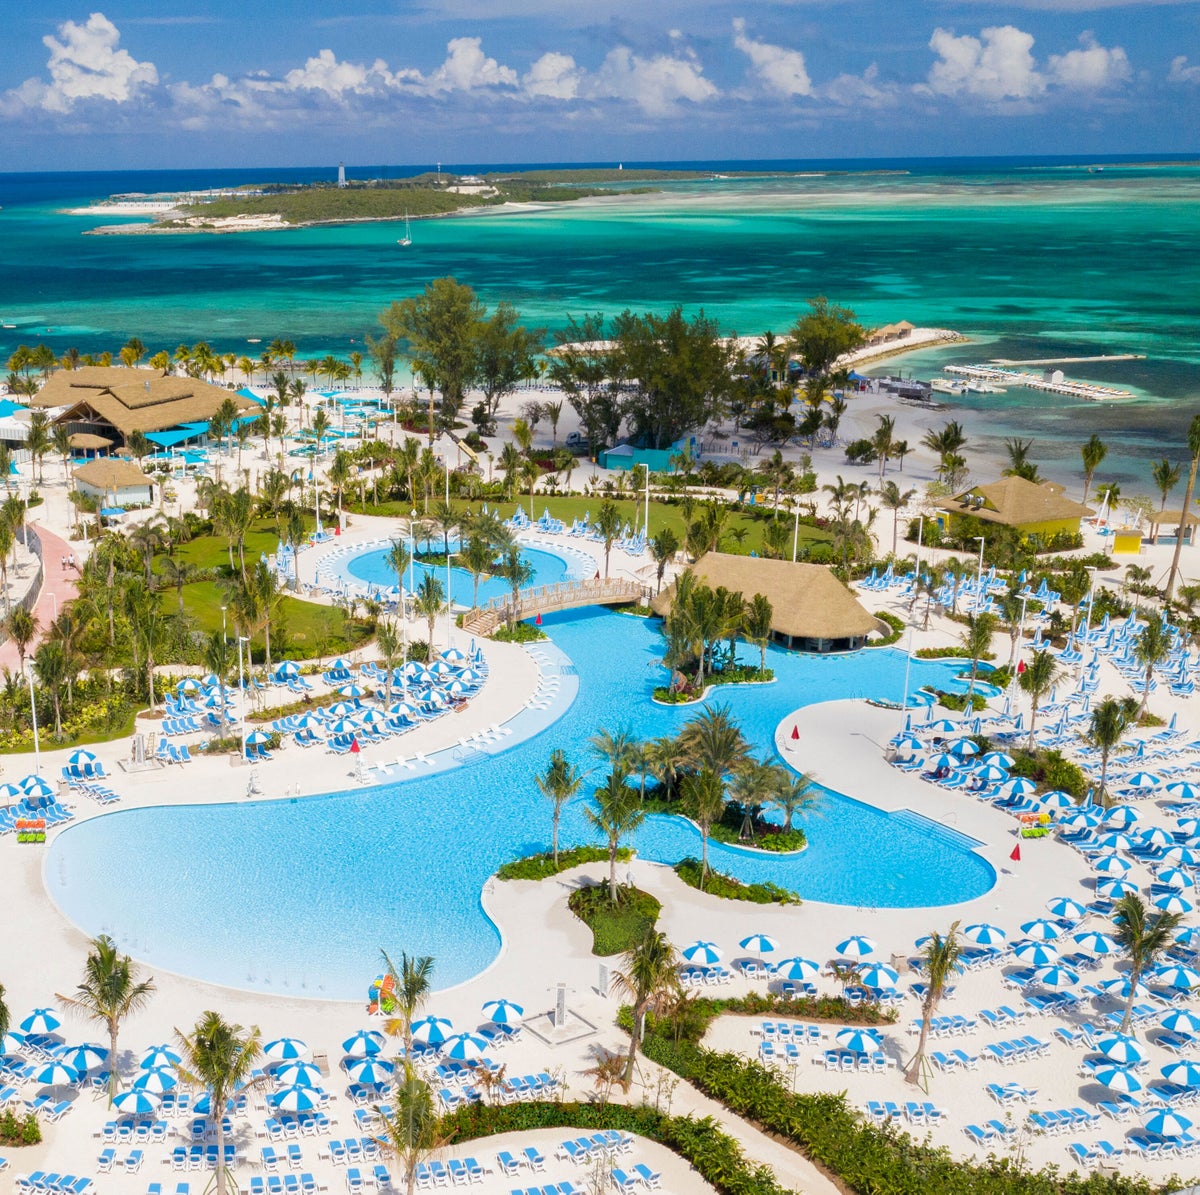 Royal Caribbean’s Private Island, Perfect Day at CocoCay, Opens Today ...